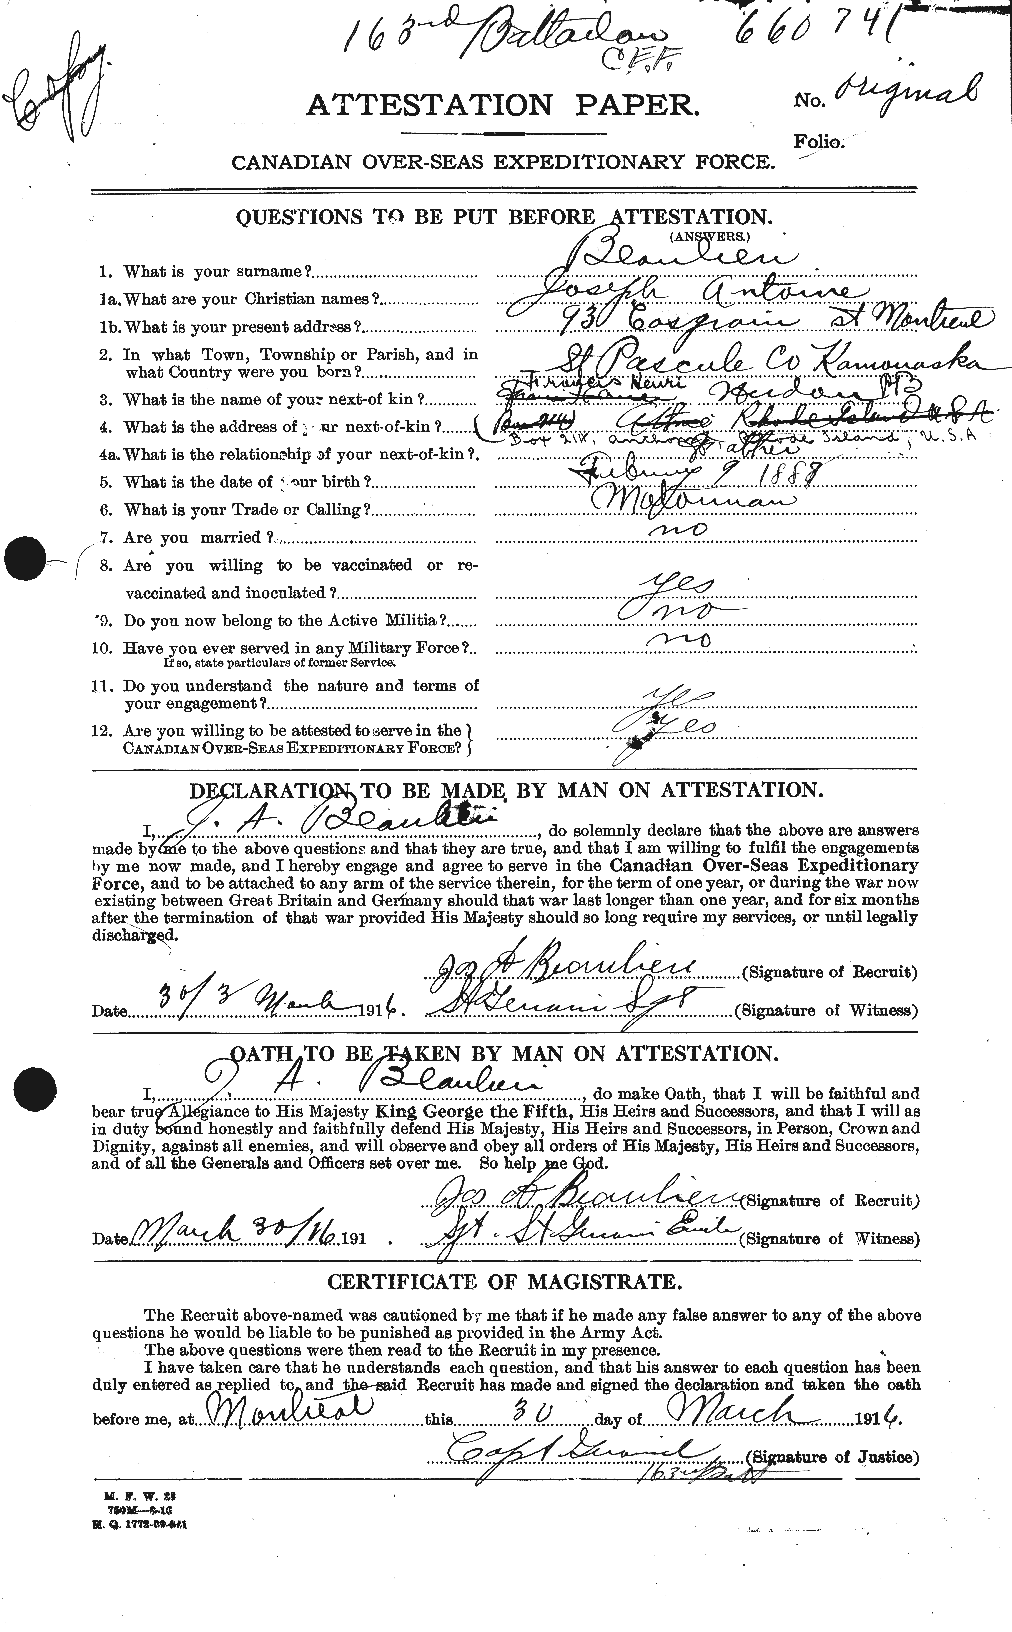 Personnel Records of the First World War - CEF 231553a